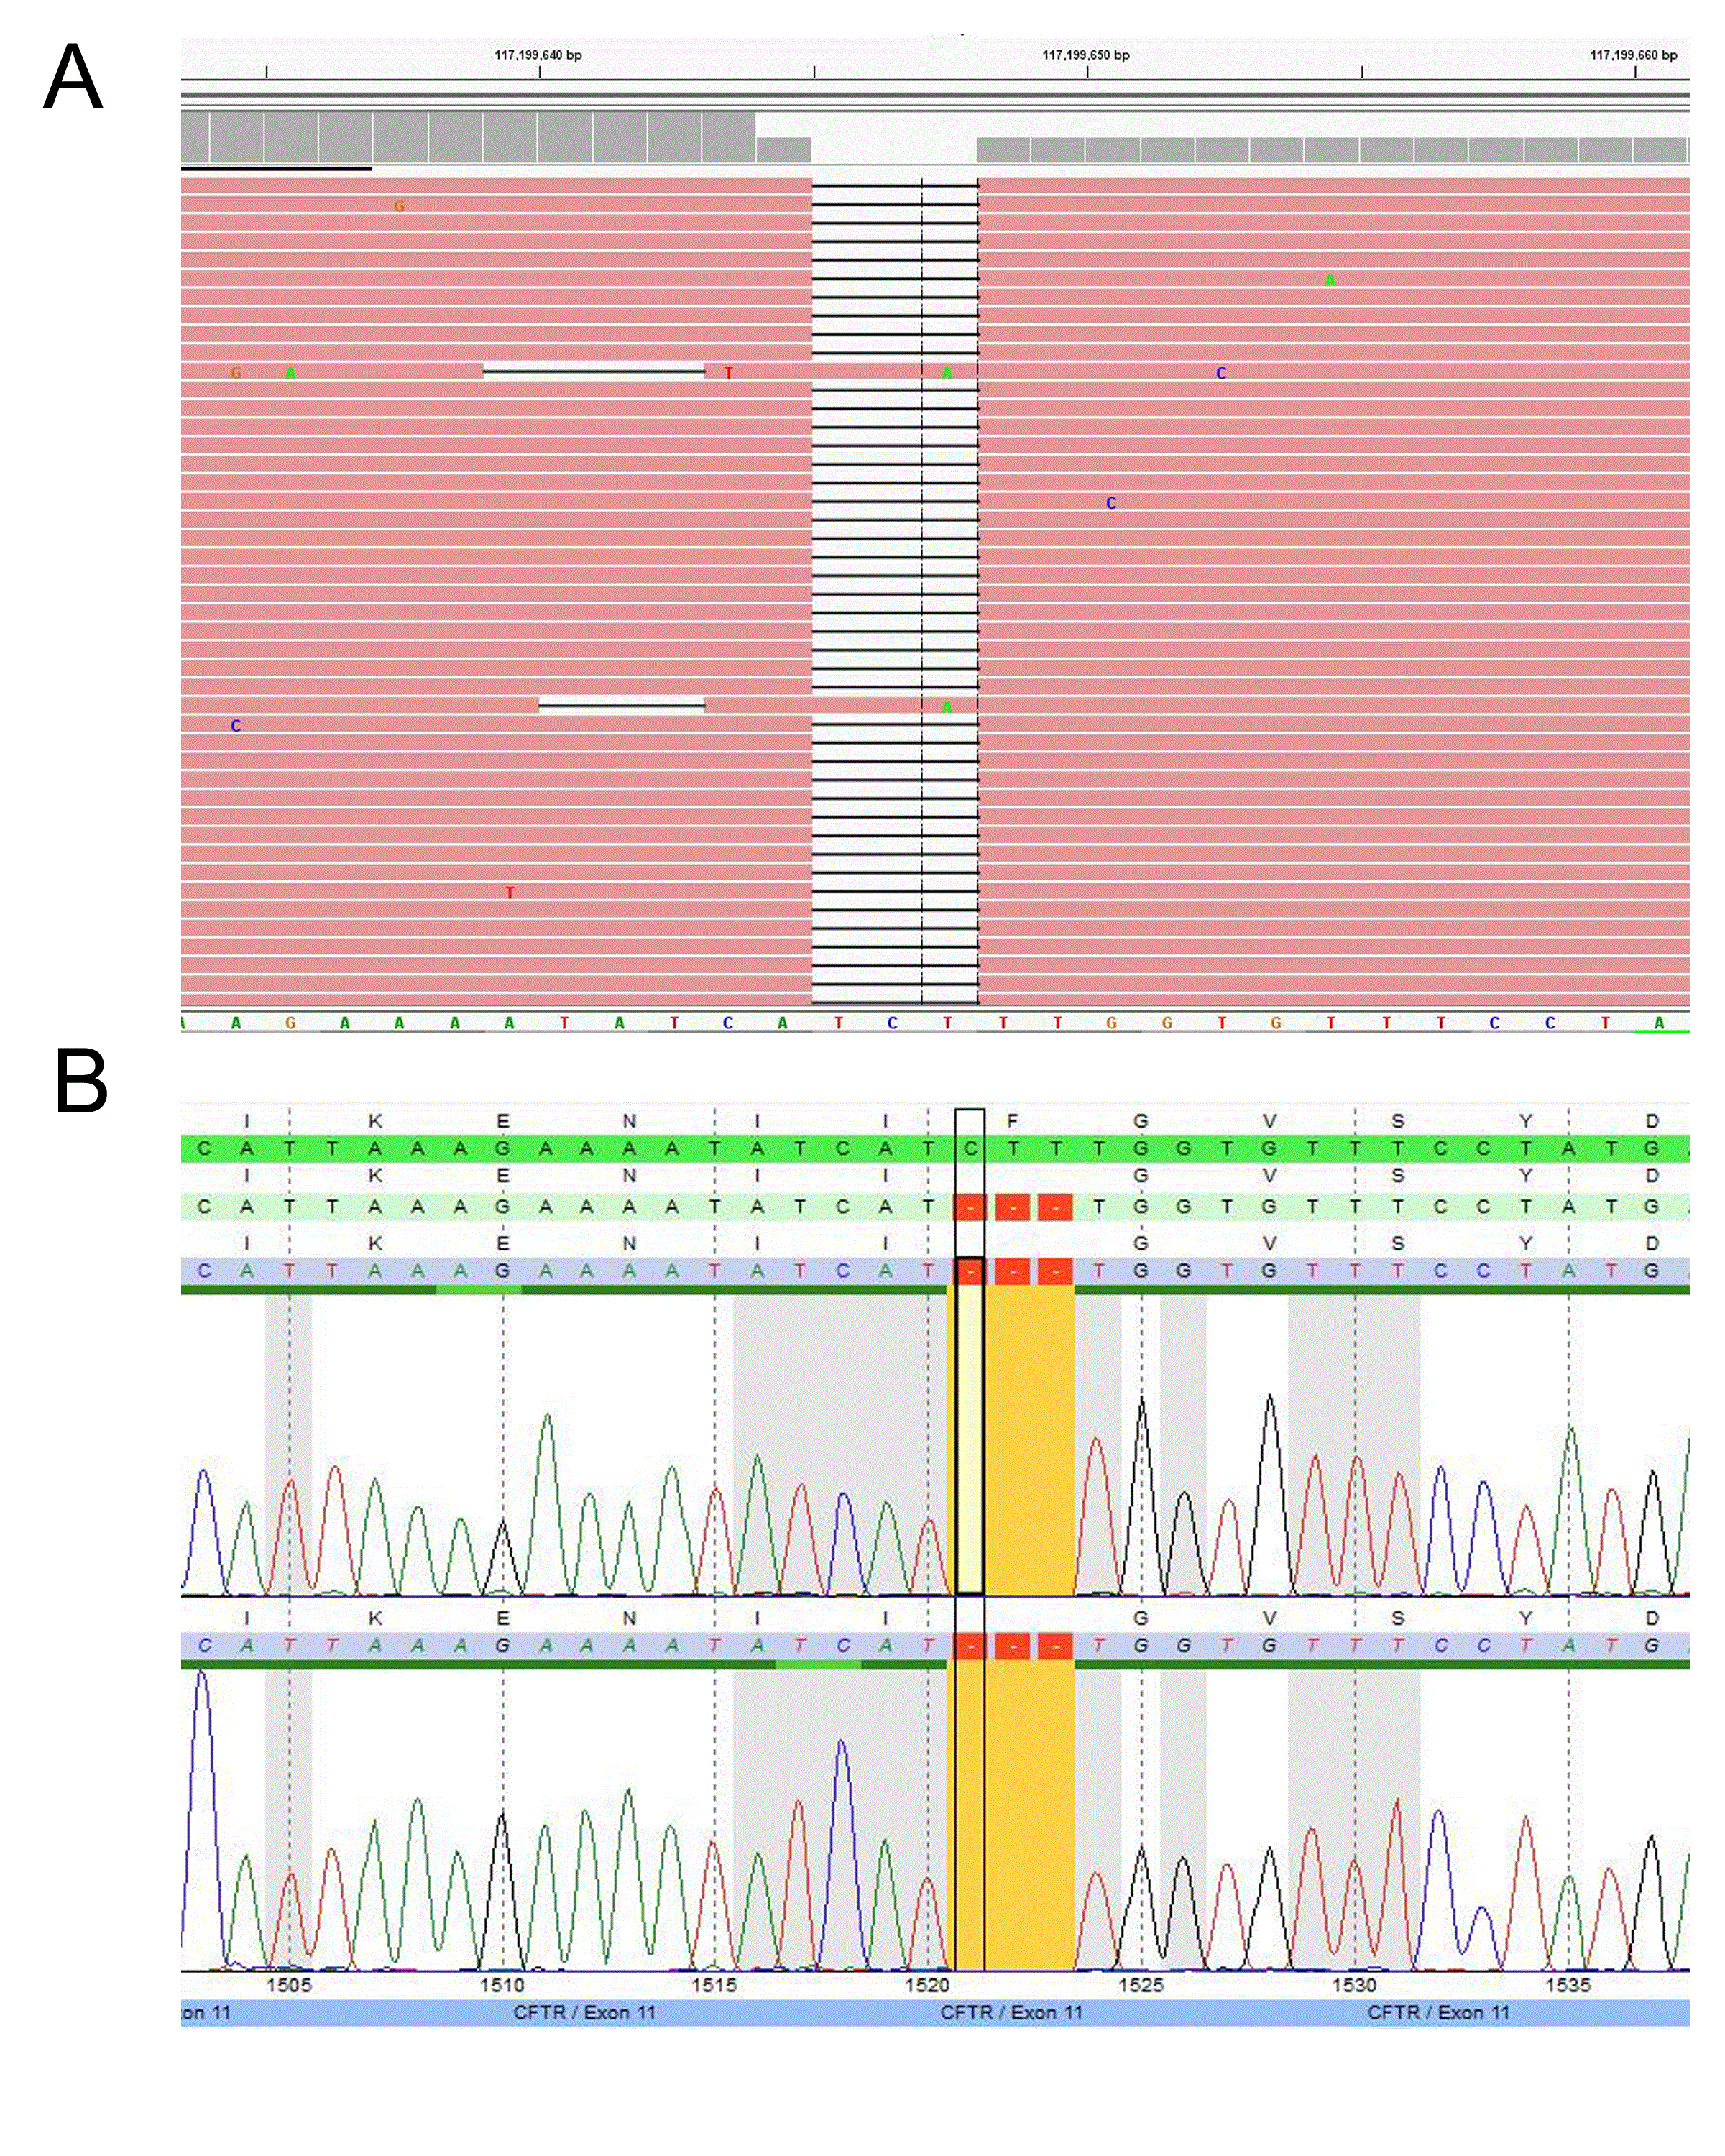 Figure 2: Example of a CFTR mutation detected by the TSCA NGS assay
(A) Homozygous small deletion at c.1521_1523delCTT (p.F508del) identified by NGS and (B) Sanger confirmed.